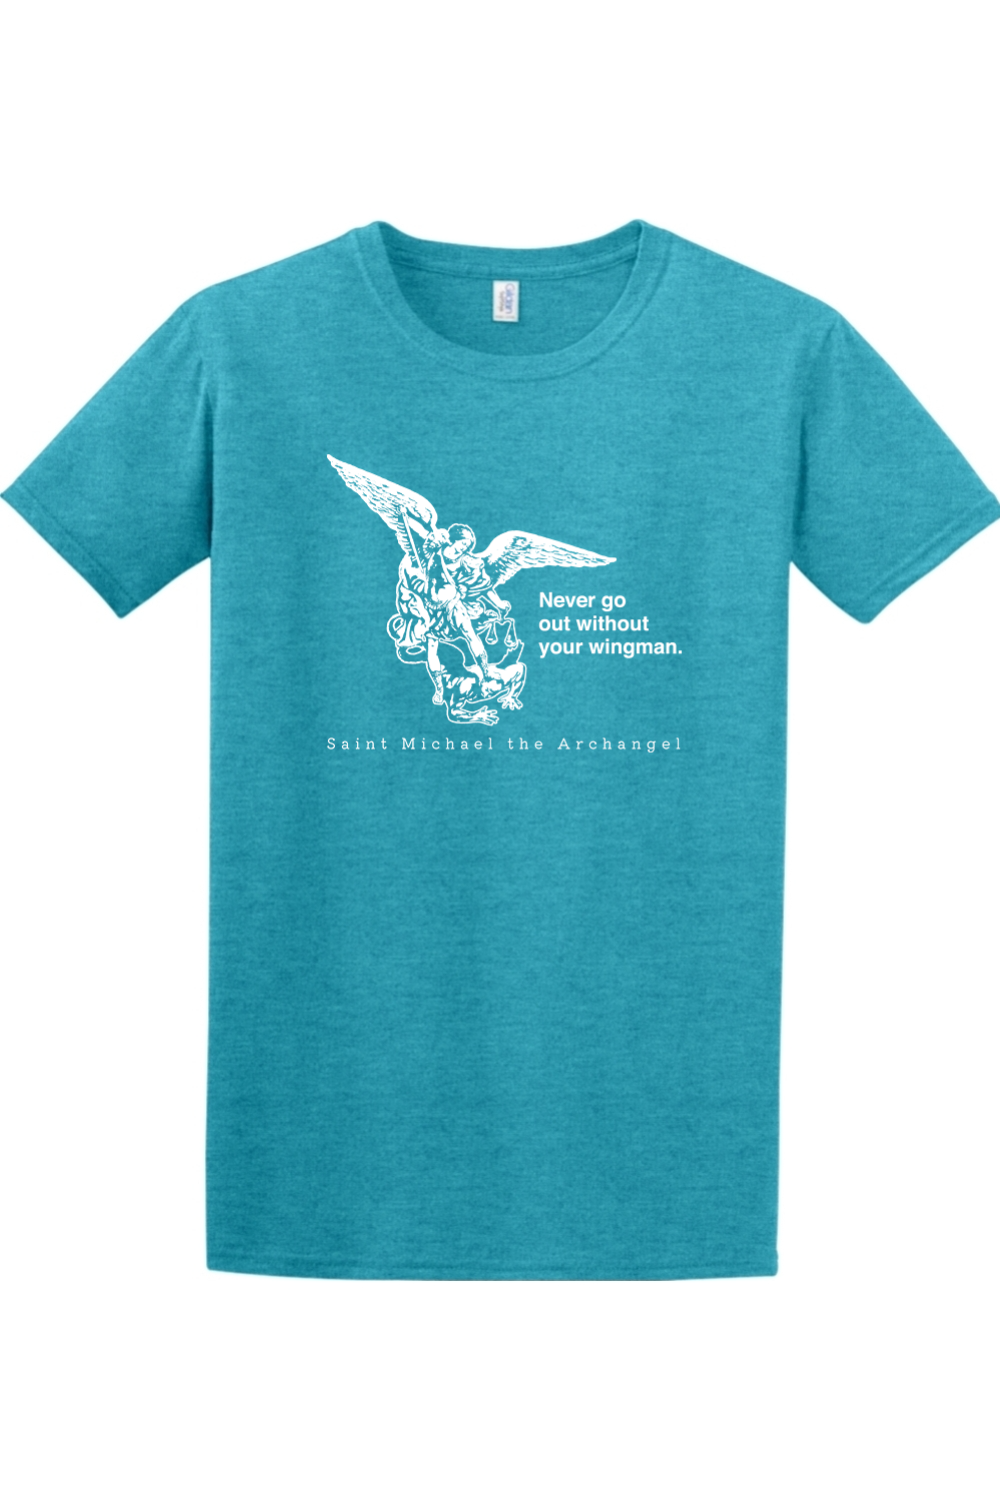 Never Go Without Your Wingman - St. Michael the Archangel Adult T-Shirt